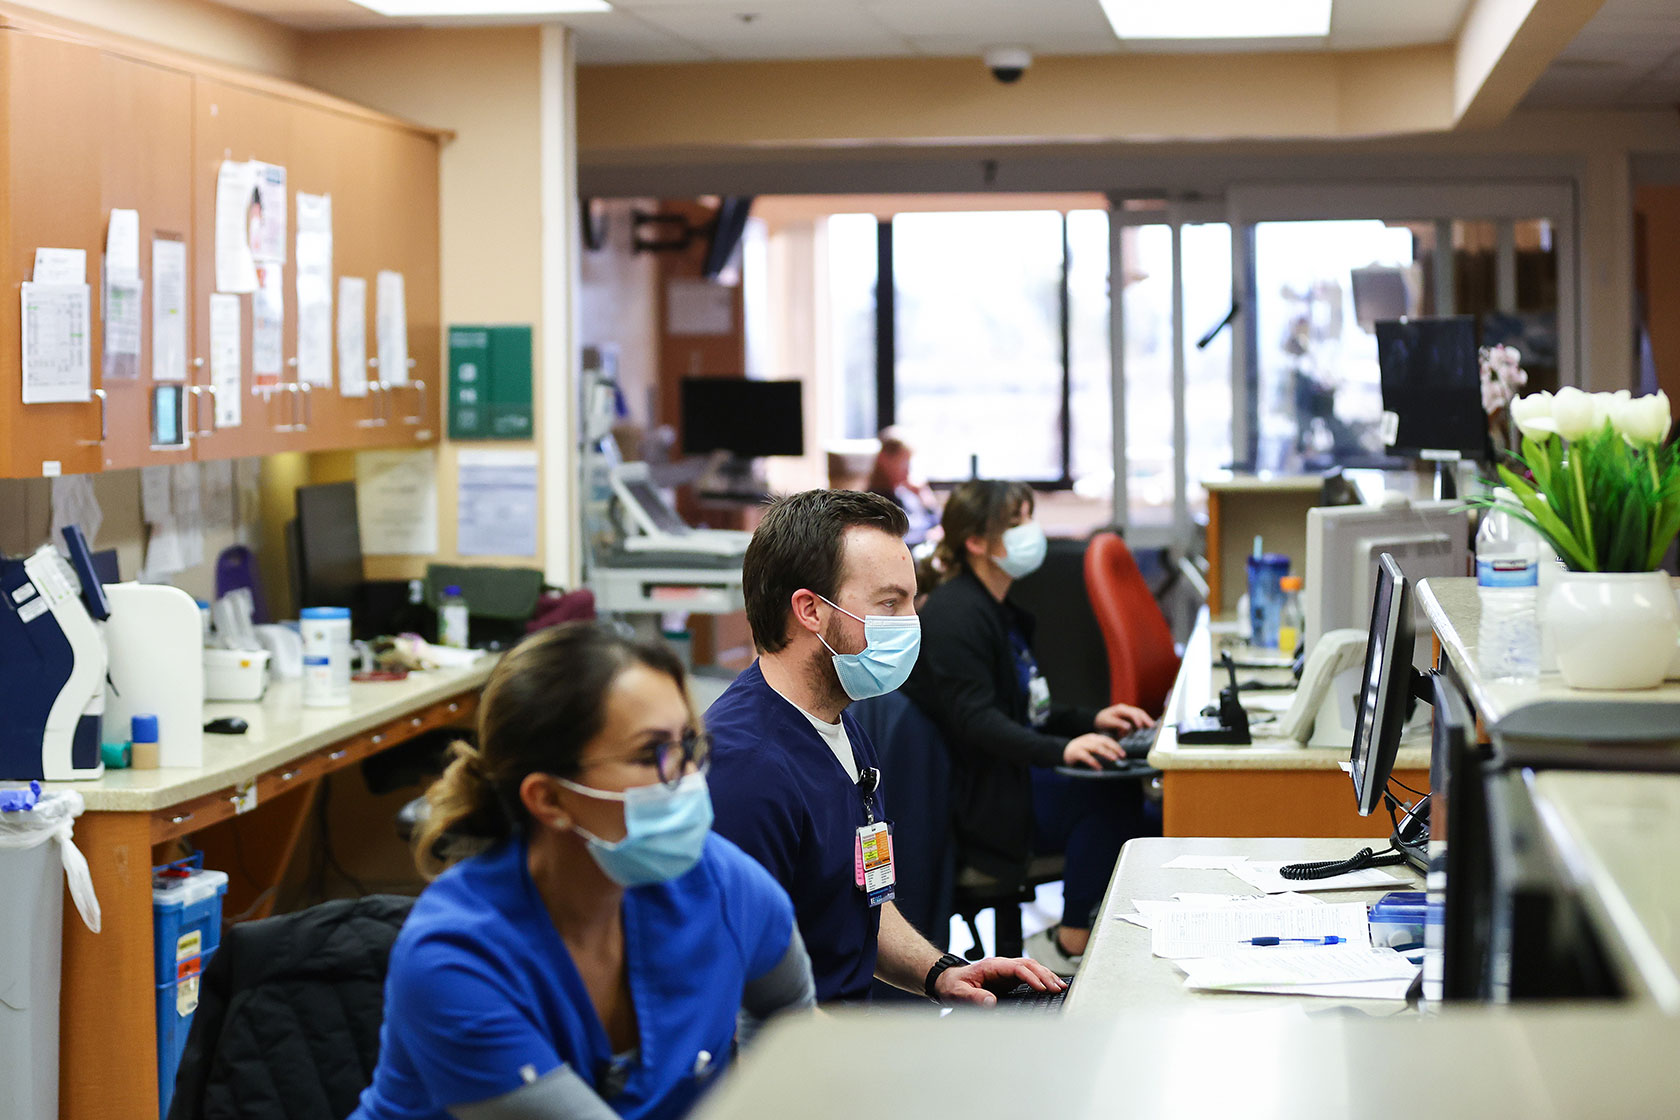 Registered nurses sit at their desks while working at a medical center.